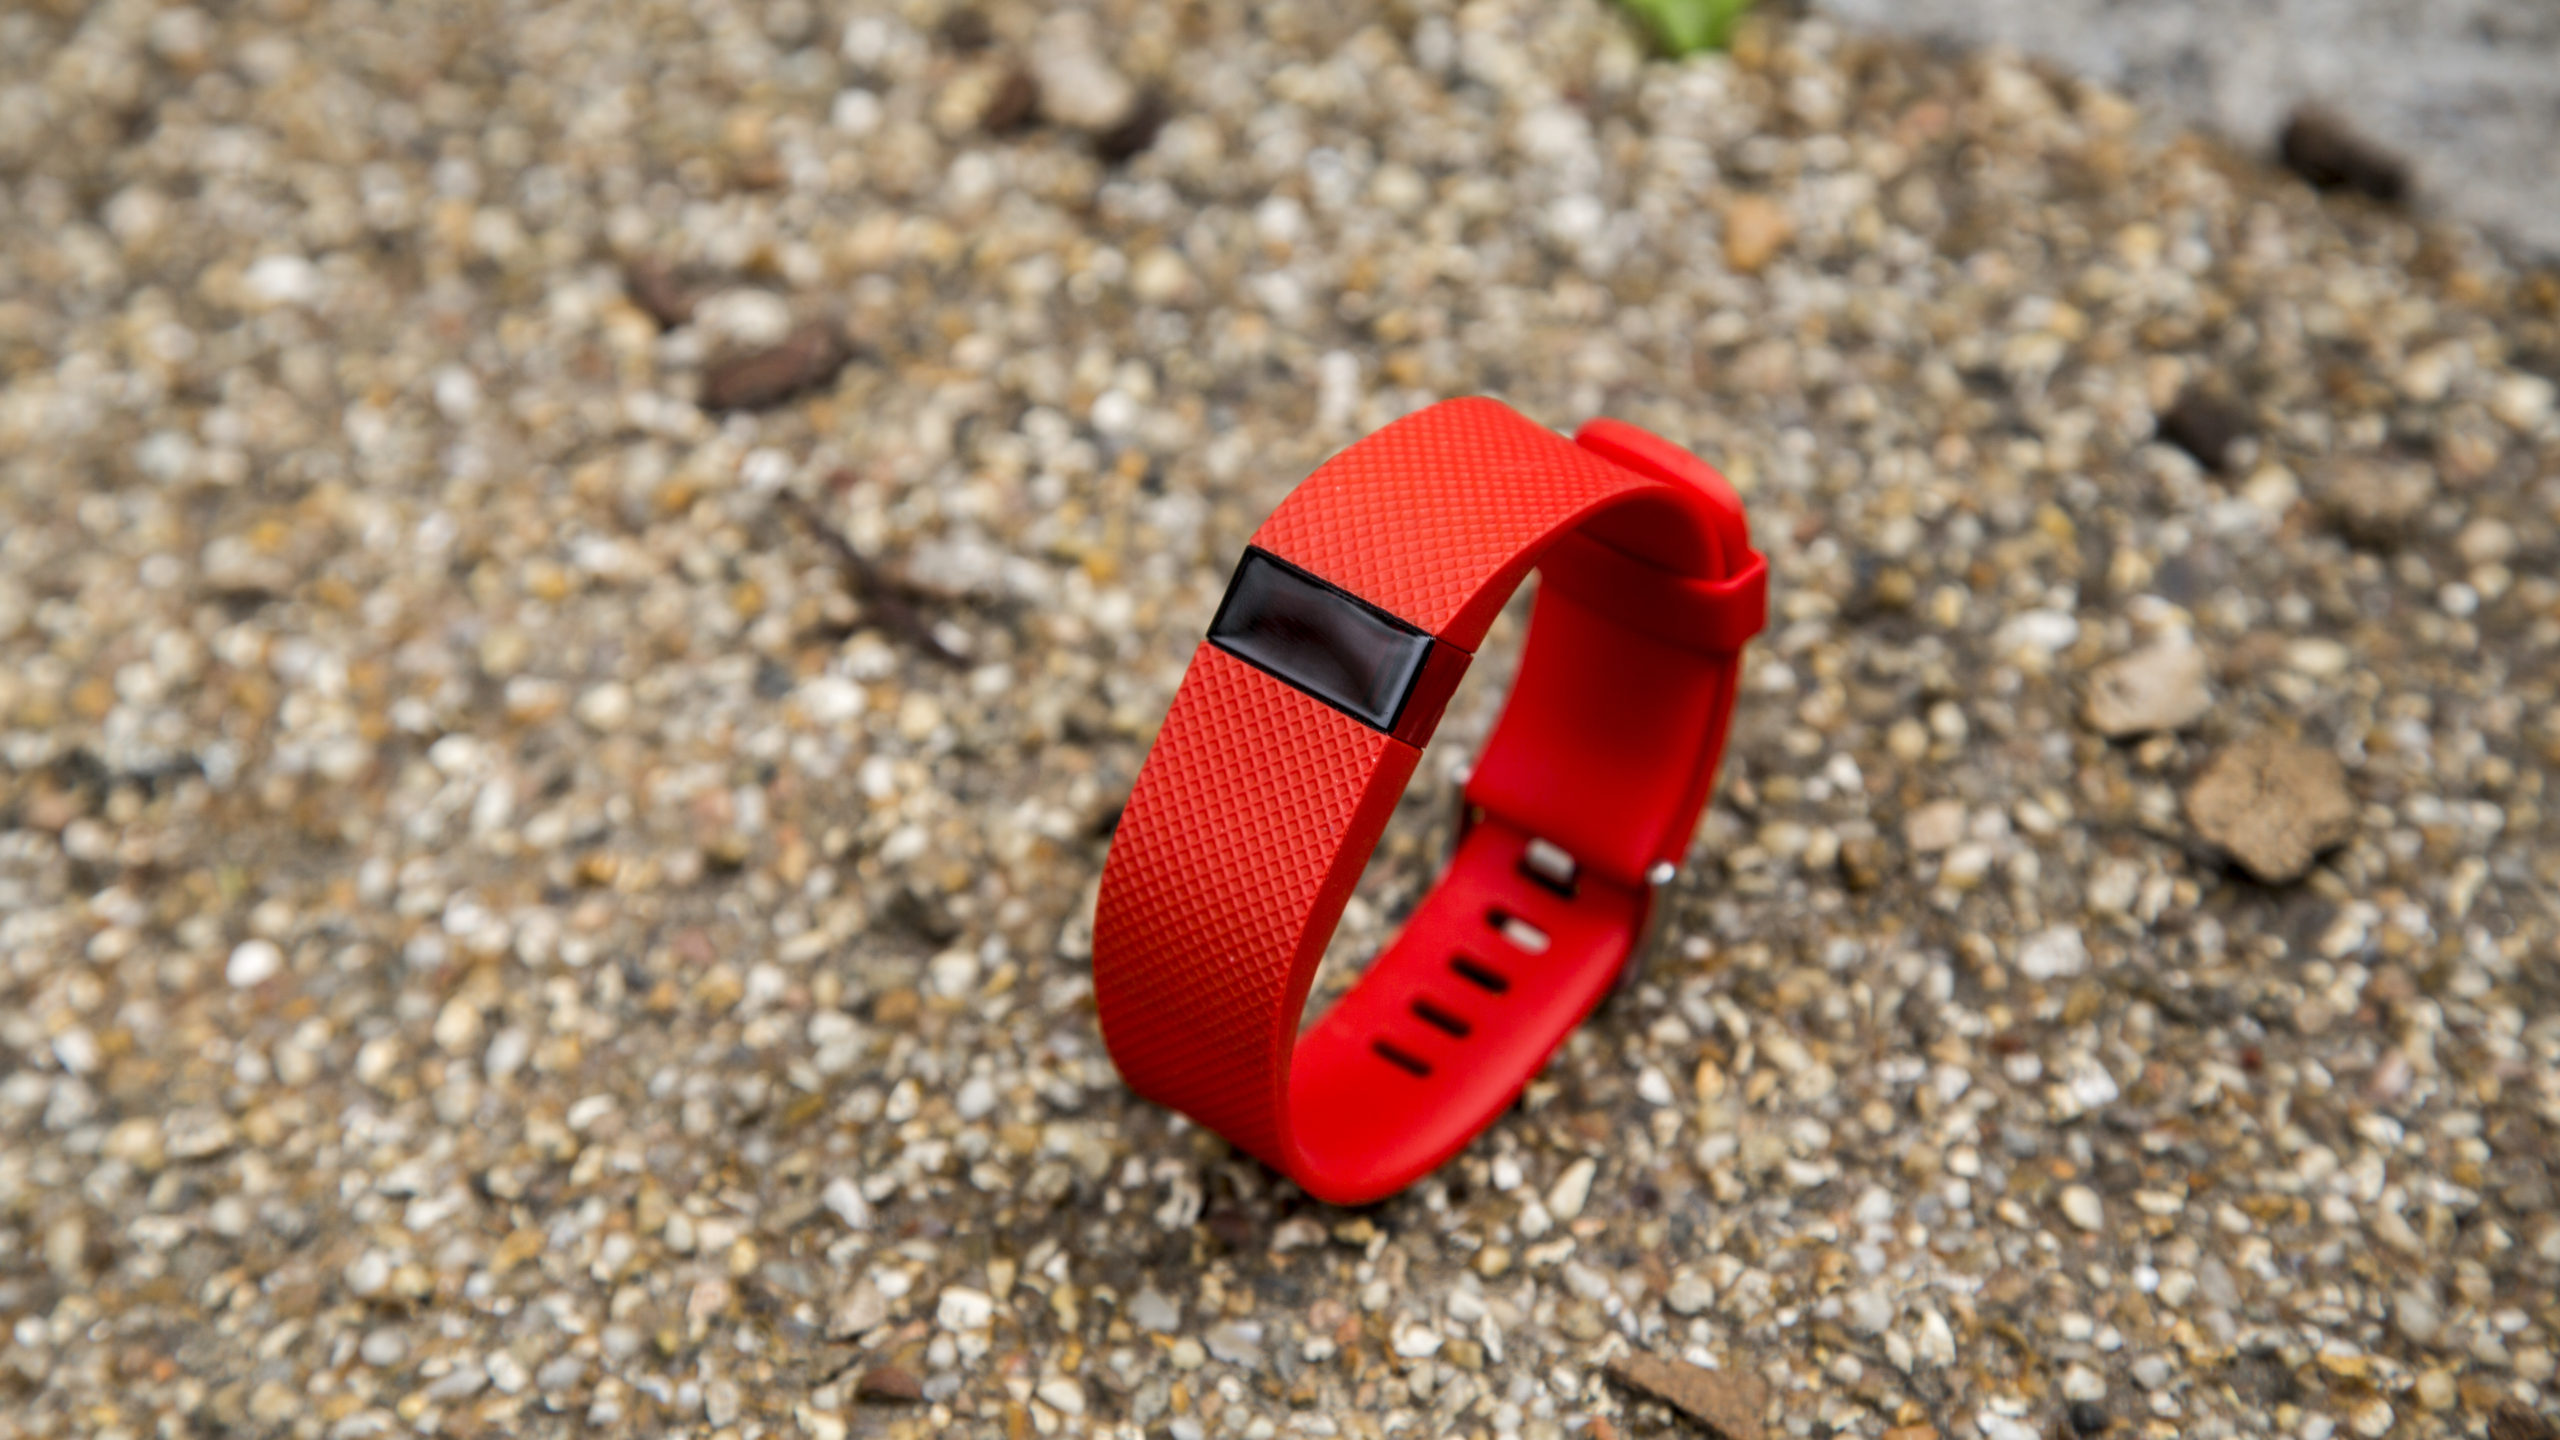 Fitbit Charge HR Super features, but could be more sleek